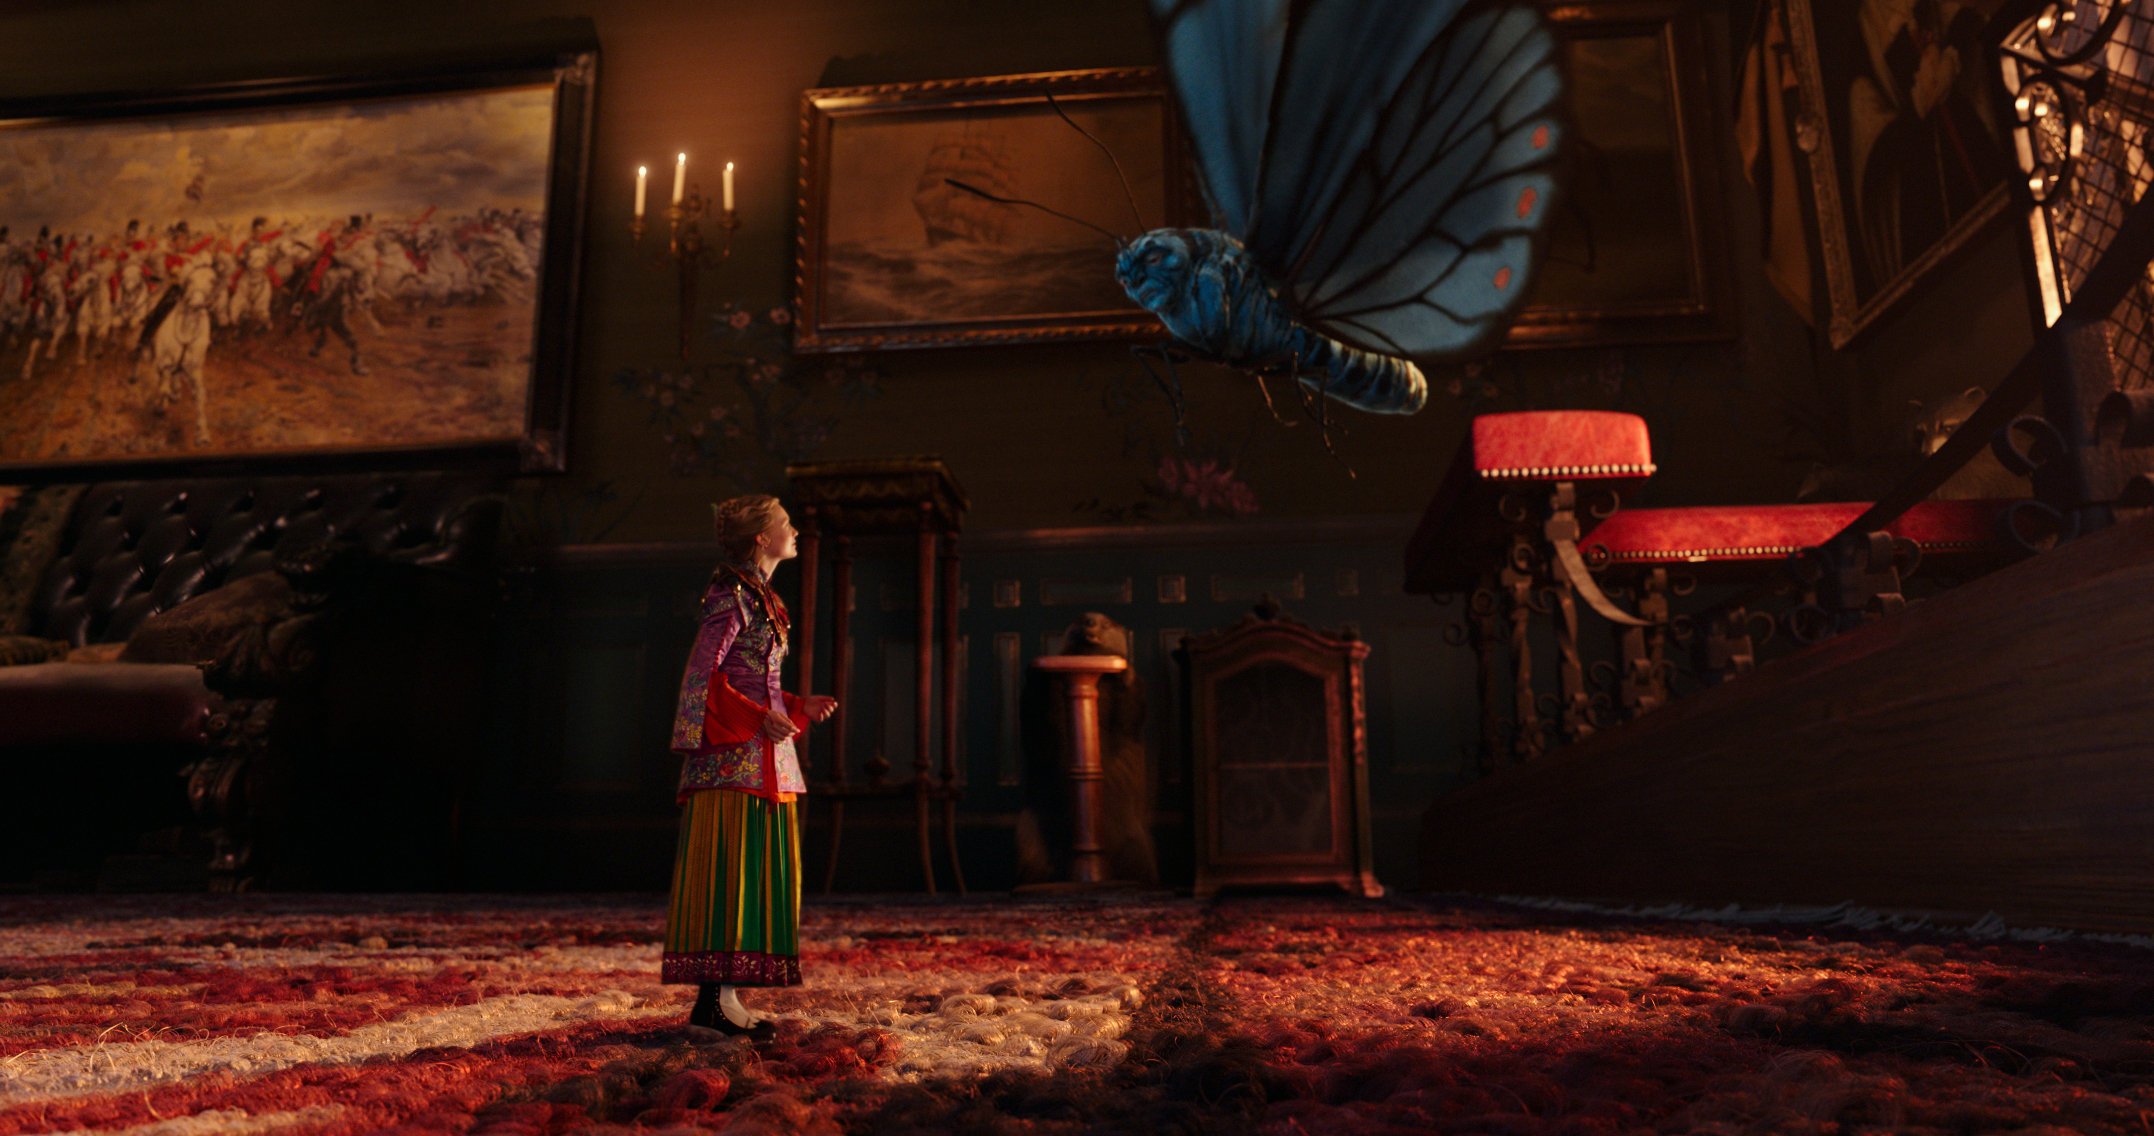 Popcultcha - Capture an iconic Alice in Wonderland scene as these